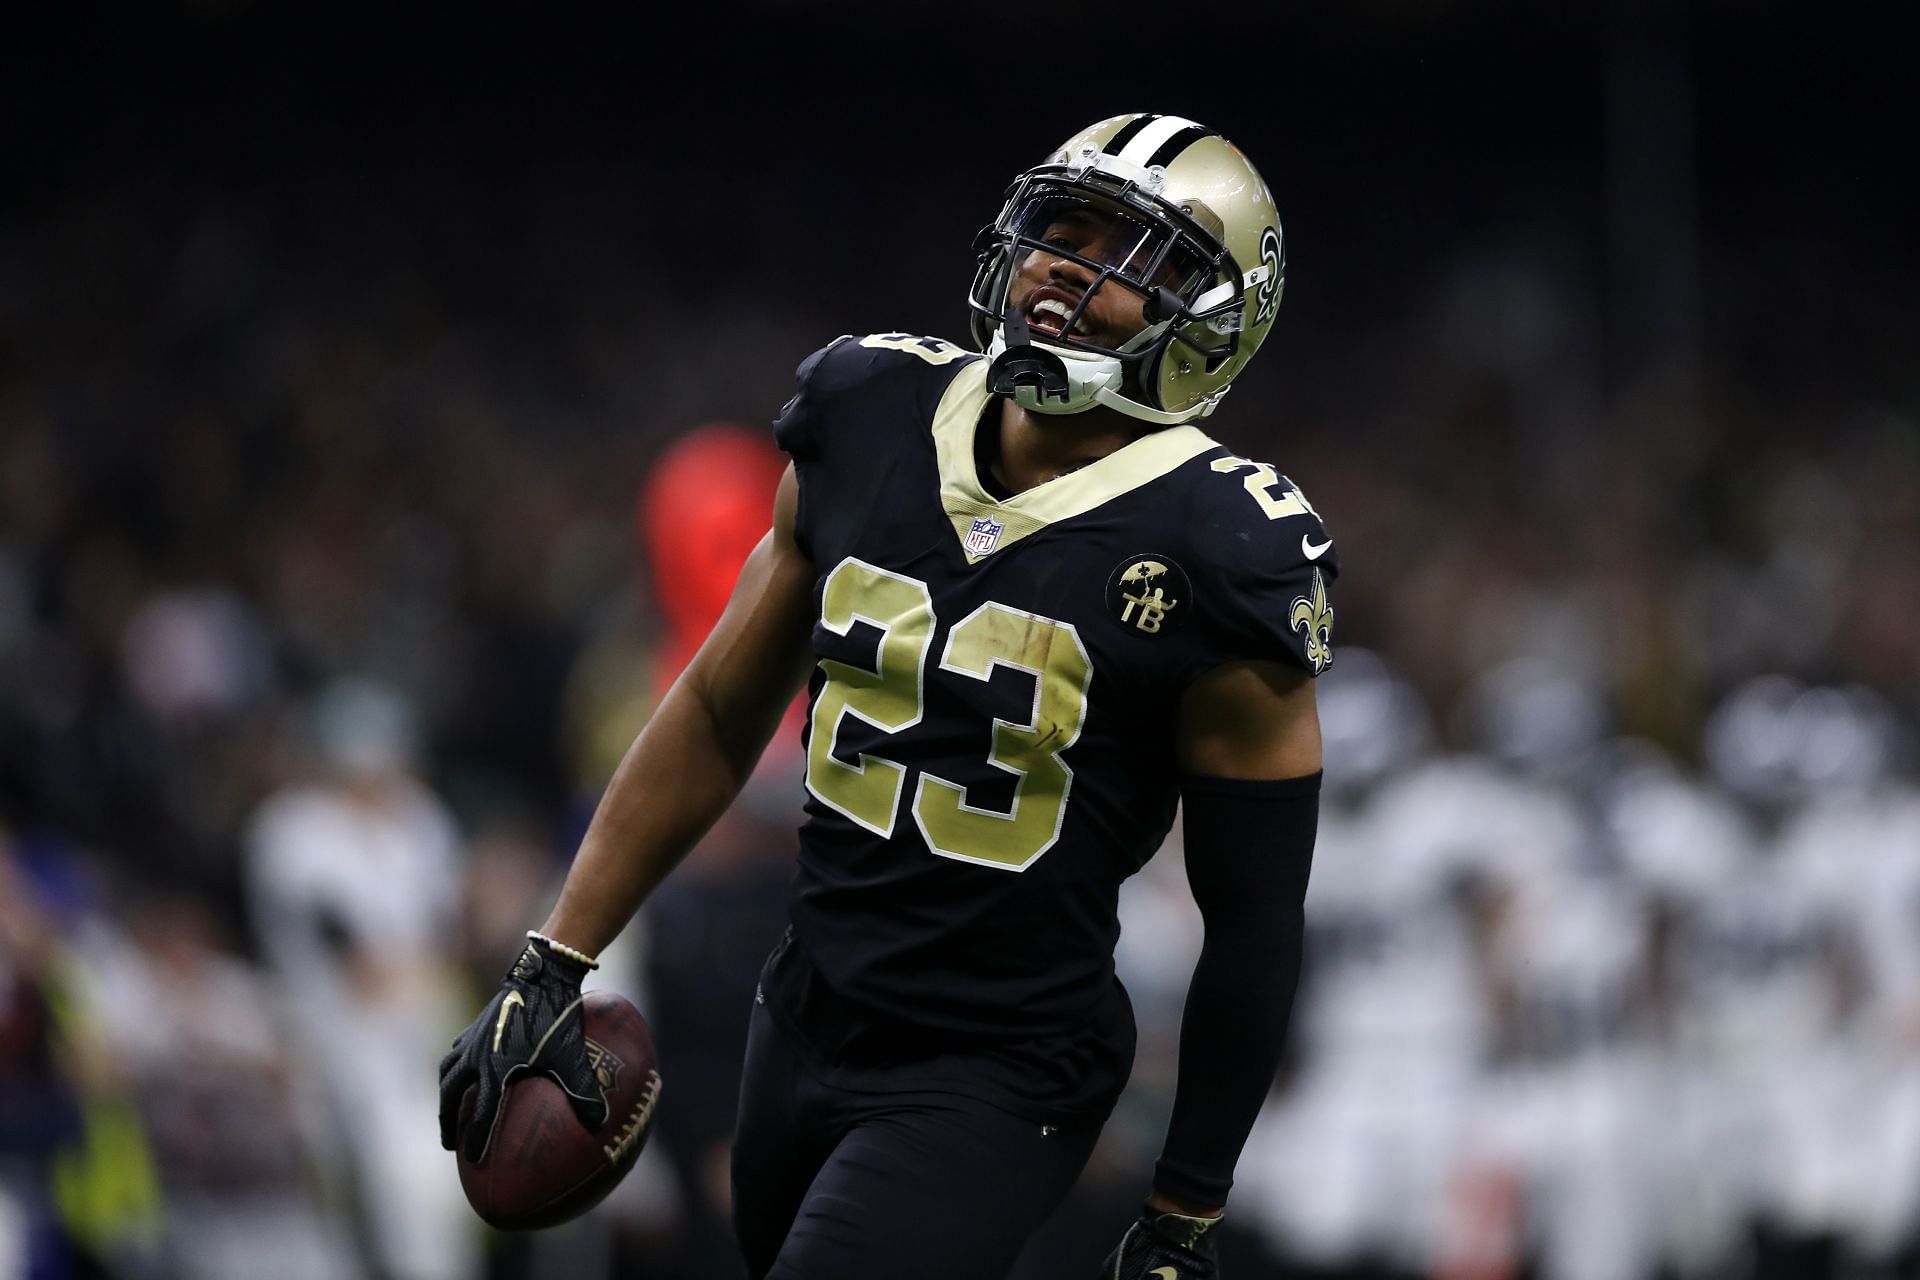 New Orleans Saints CB Marshon Lattimore won the DROY after leaving Ohio State in 2016